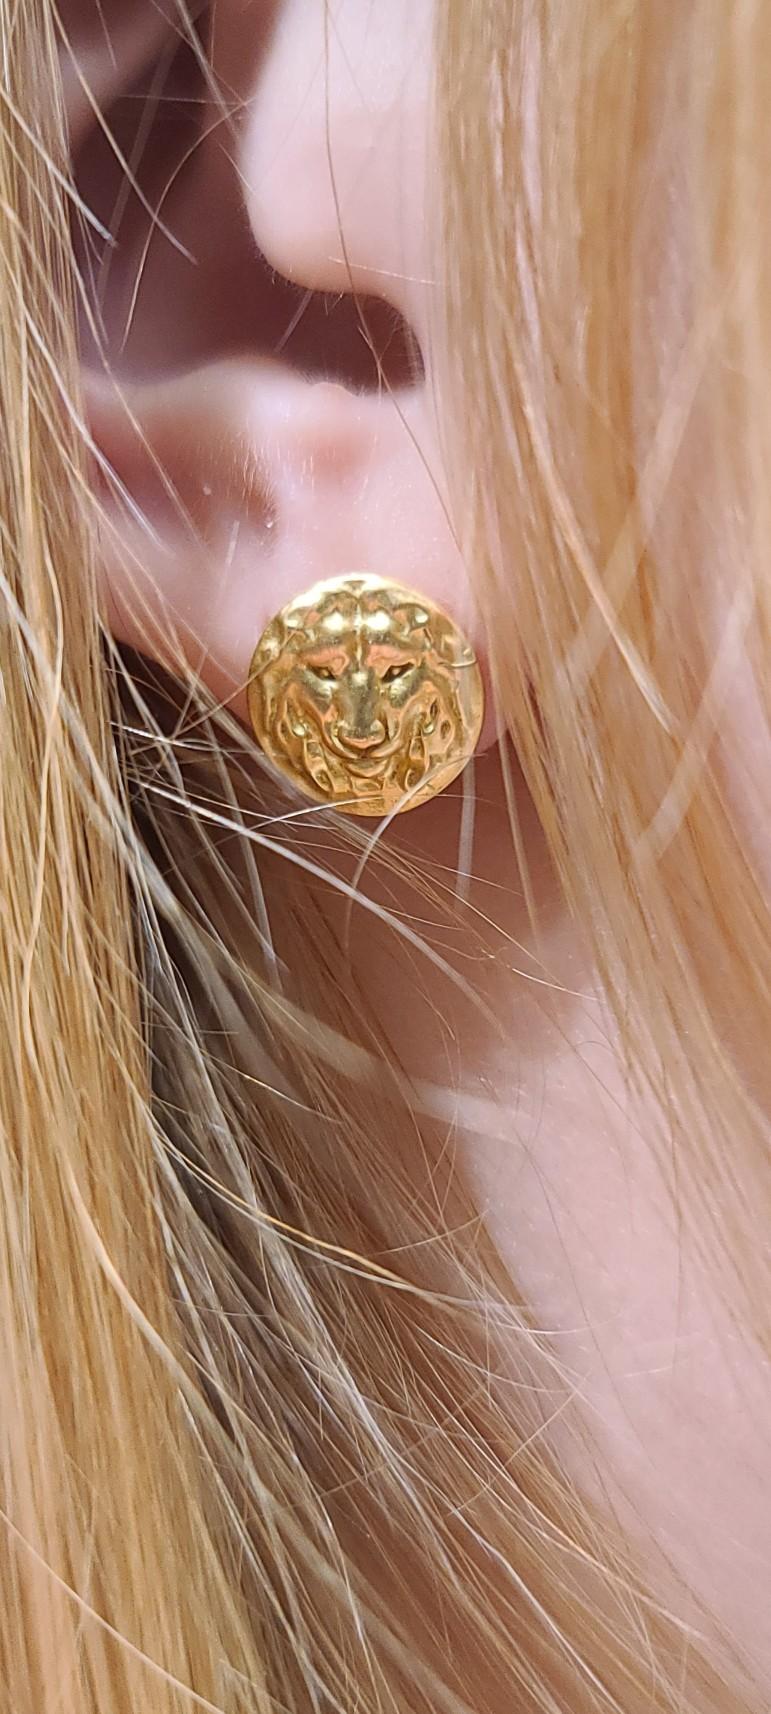 18 Karat Green Gold Lion Stud Earrings, The new king of the jungle made especially for the ears now! Absolutely fearless.  Can you hear the roar? It's so close to your ear now , I bet you could. Who does not want to go on a safari?  Polished. 11.5